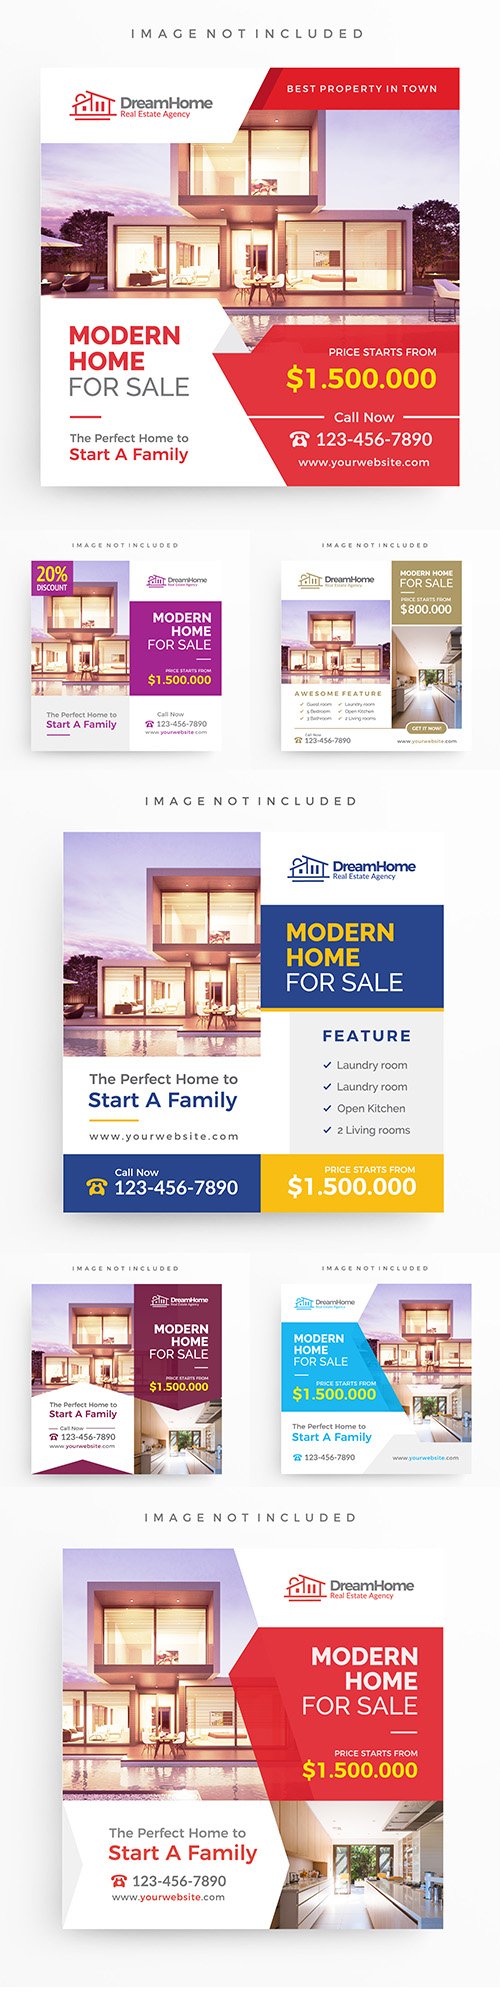 Real estate for sale banner template for promotion